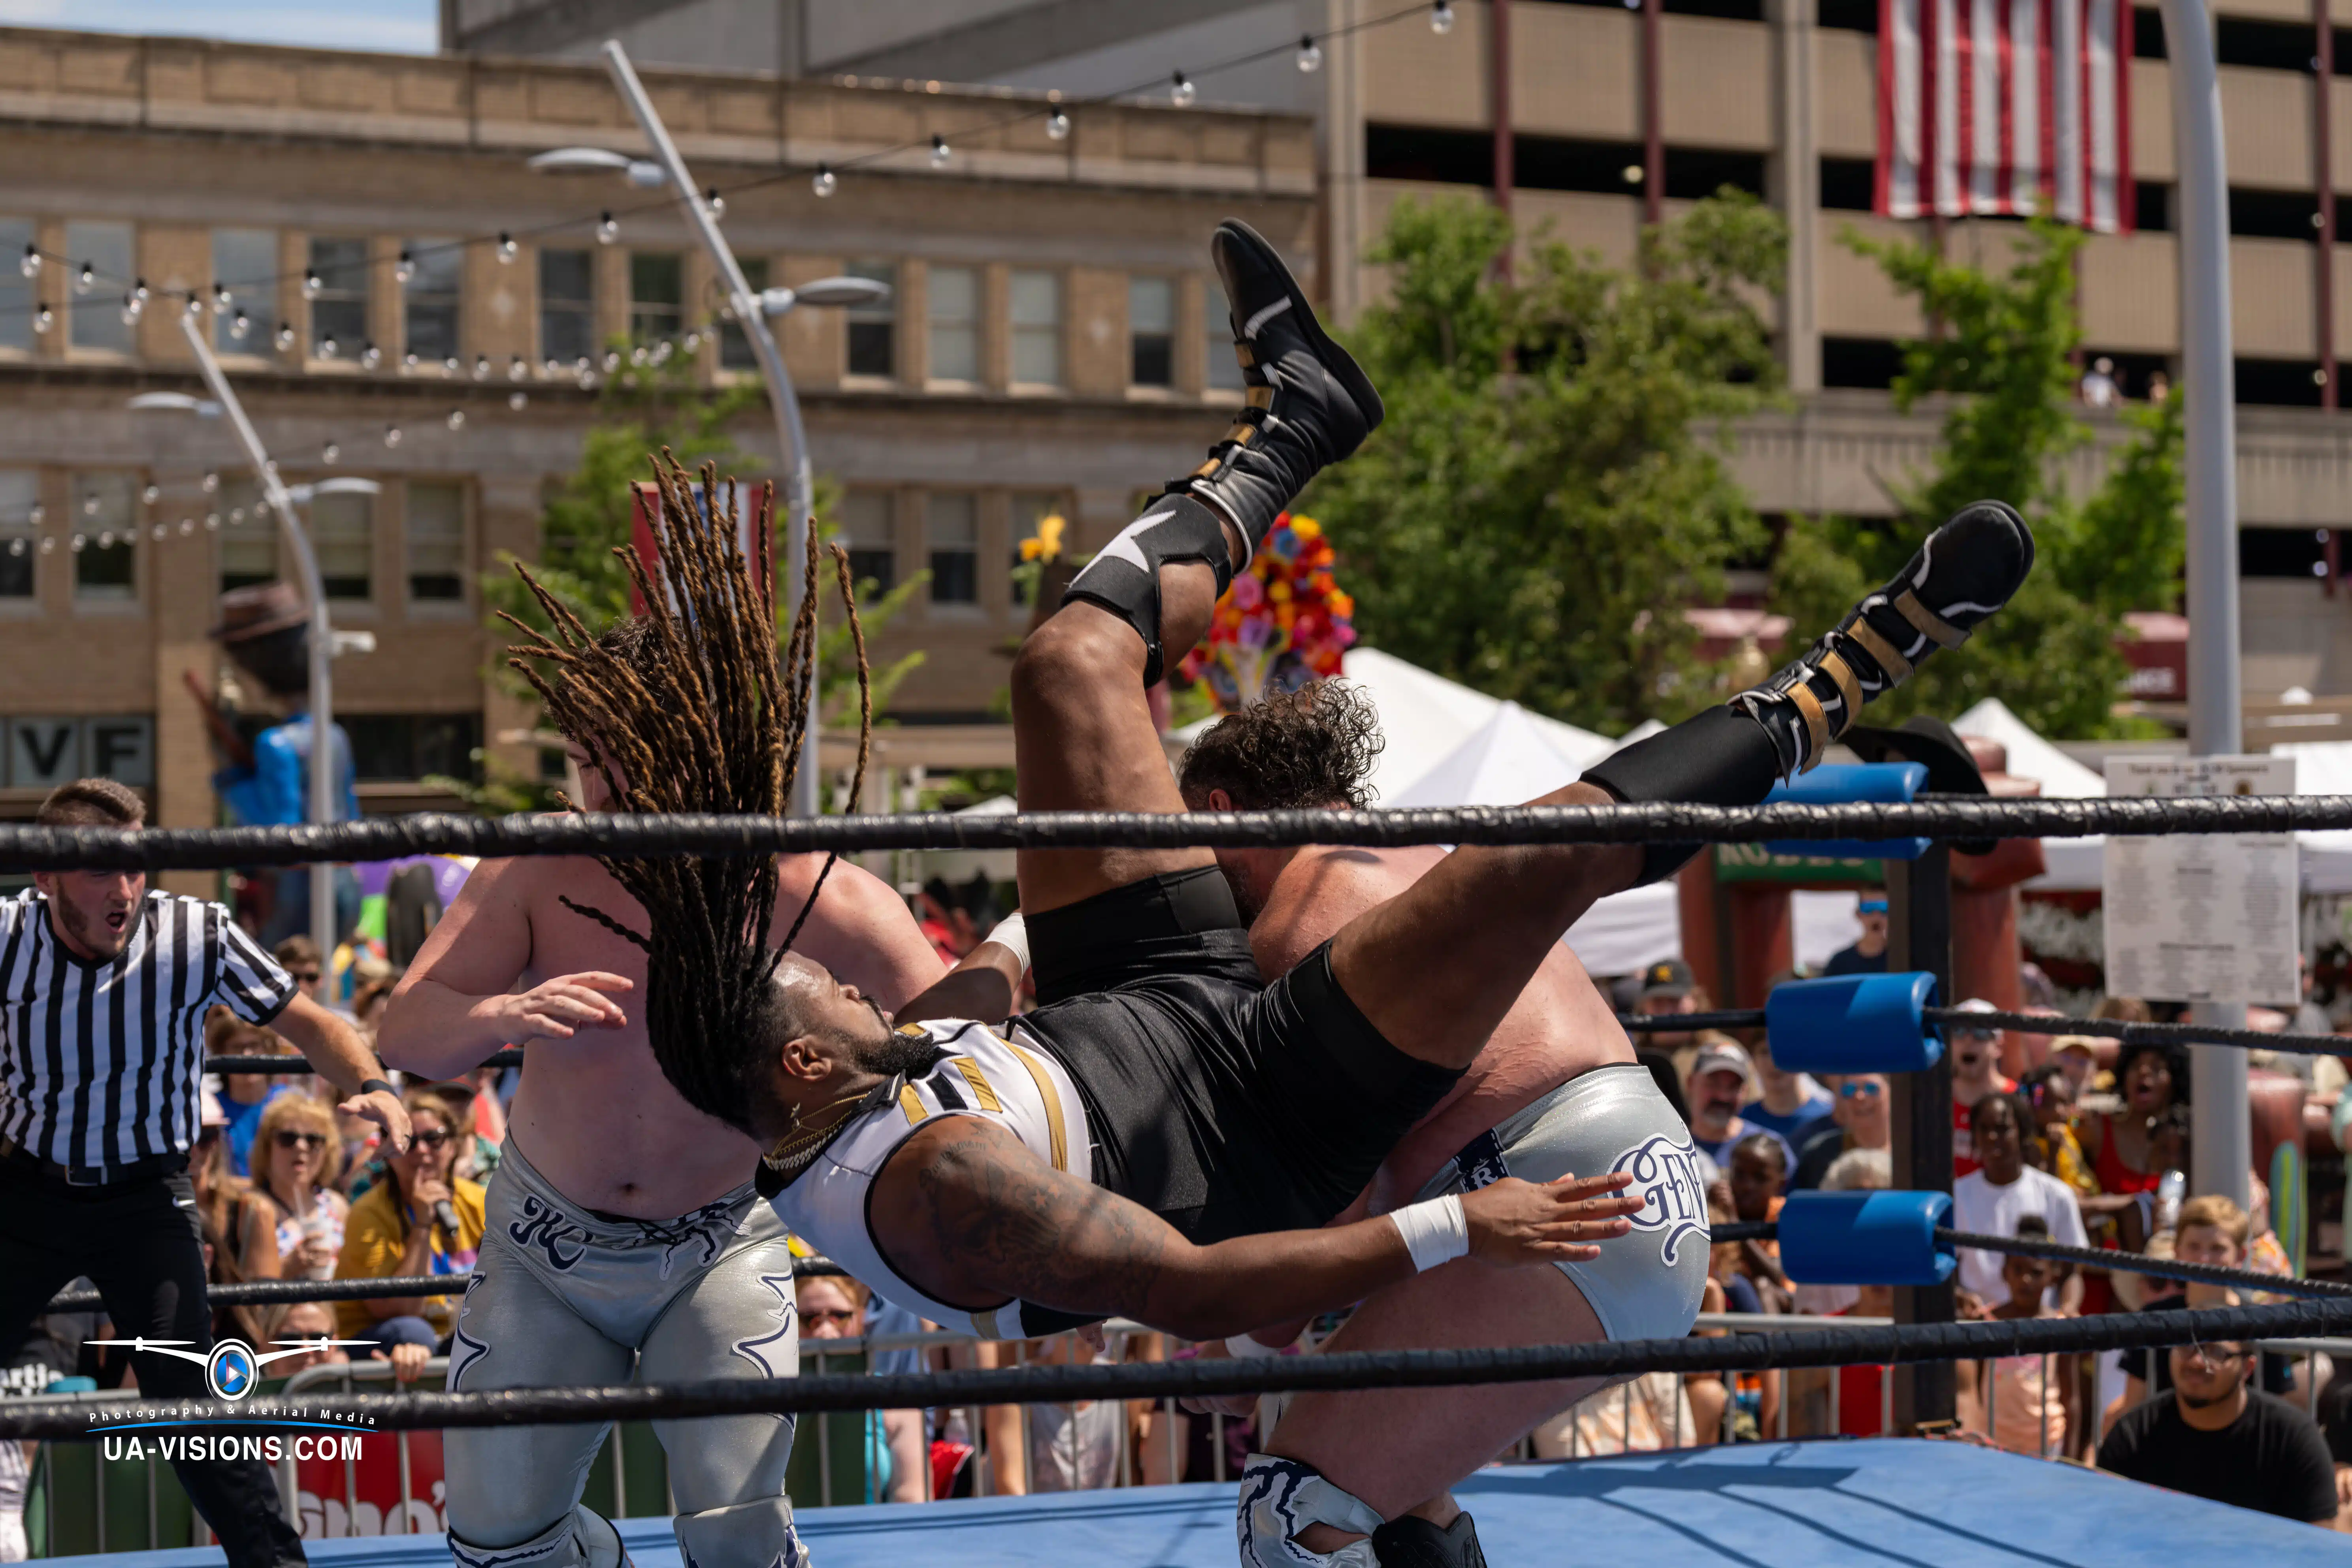 The Pro Wrestling Event at the 2024 Charleston Sternwheel Regatta taken by the UA-Visions Team